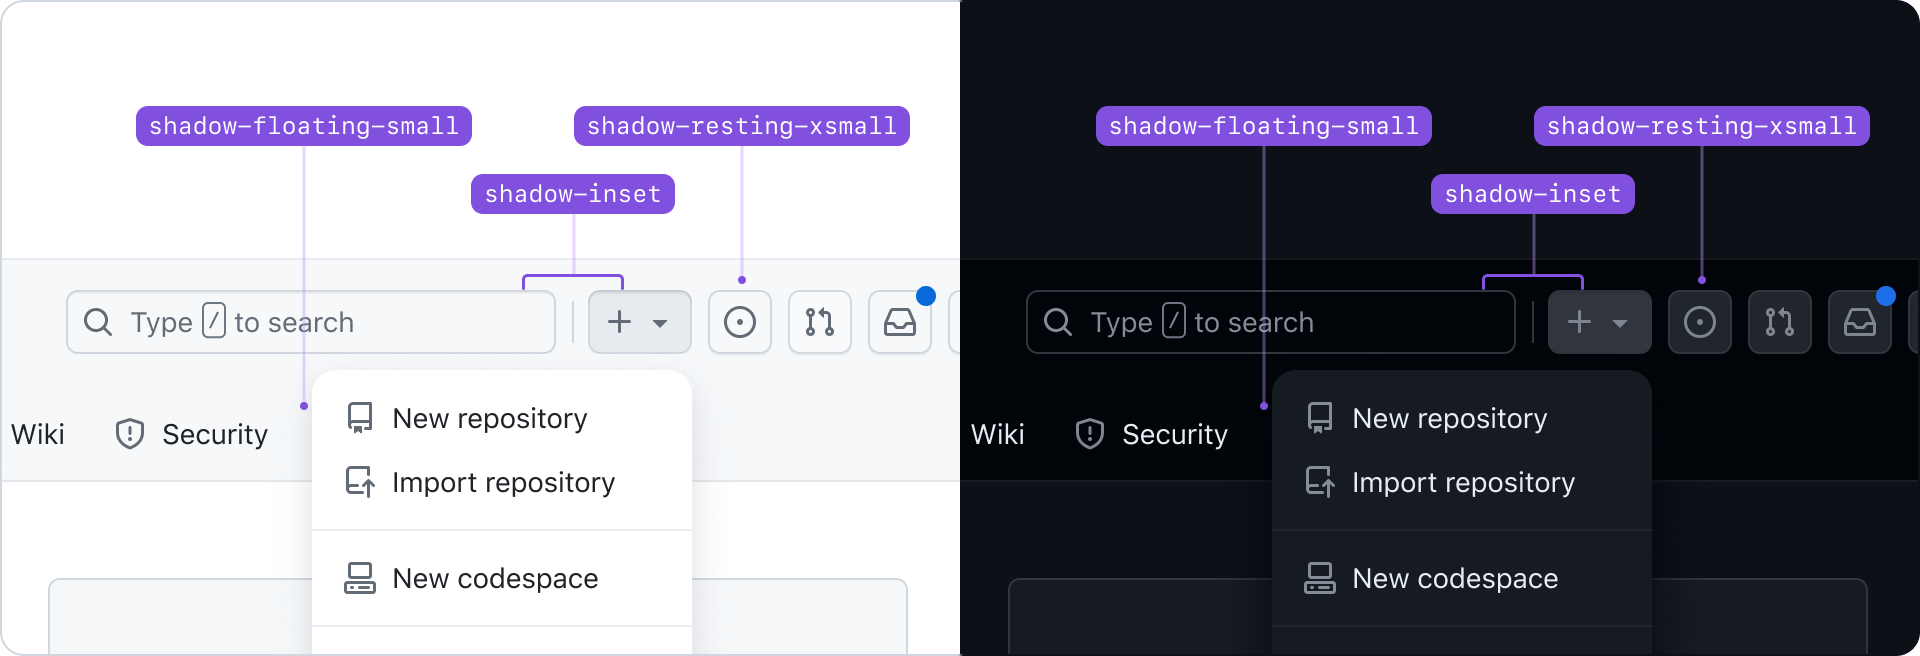 GitHub interface design elements annotated with shadow styles: 'shadow-floating-small', 'shadow-resting-xsmall', and 'shadow-inset', displayed on light and dark mode backgrounds.